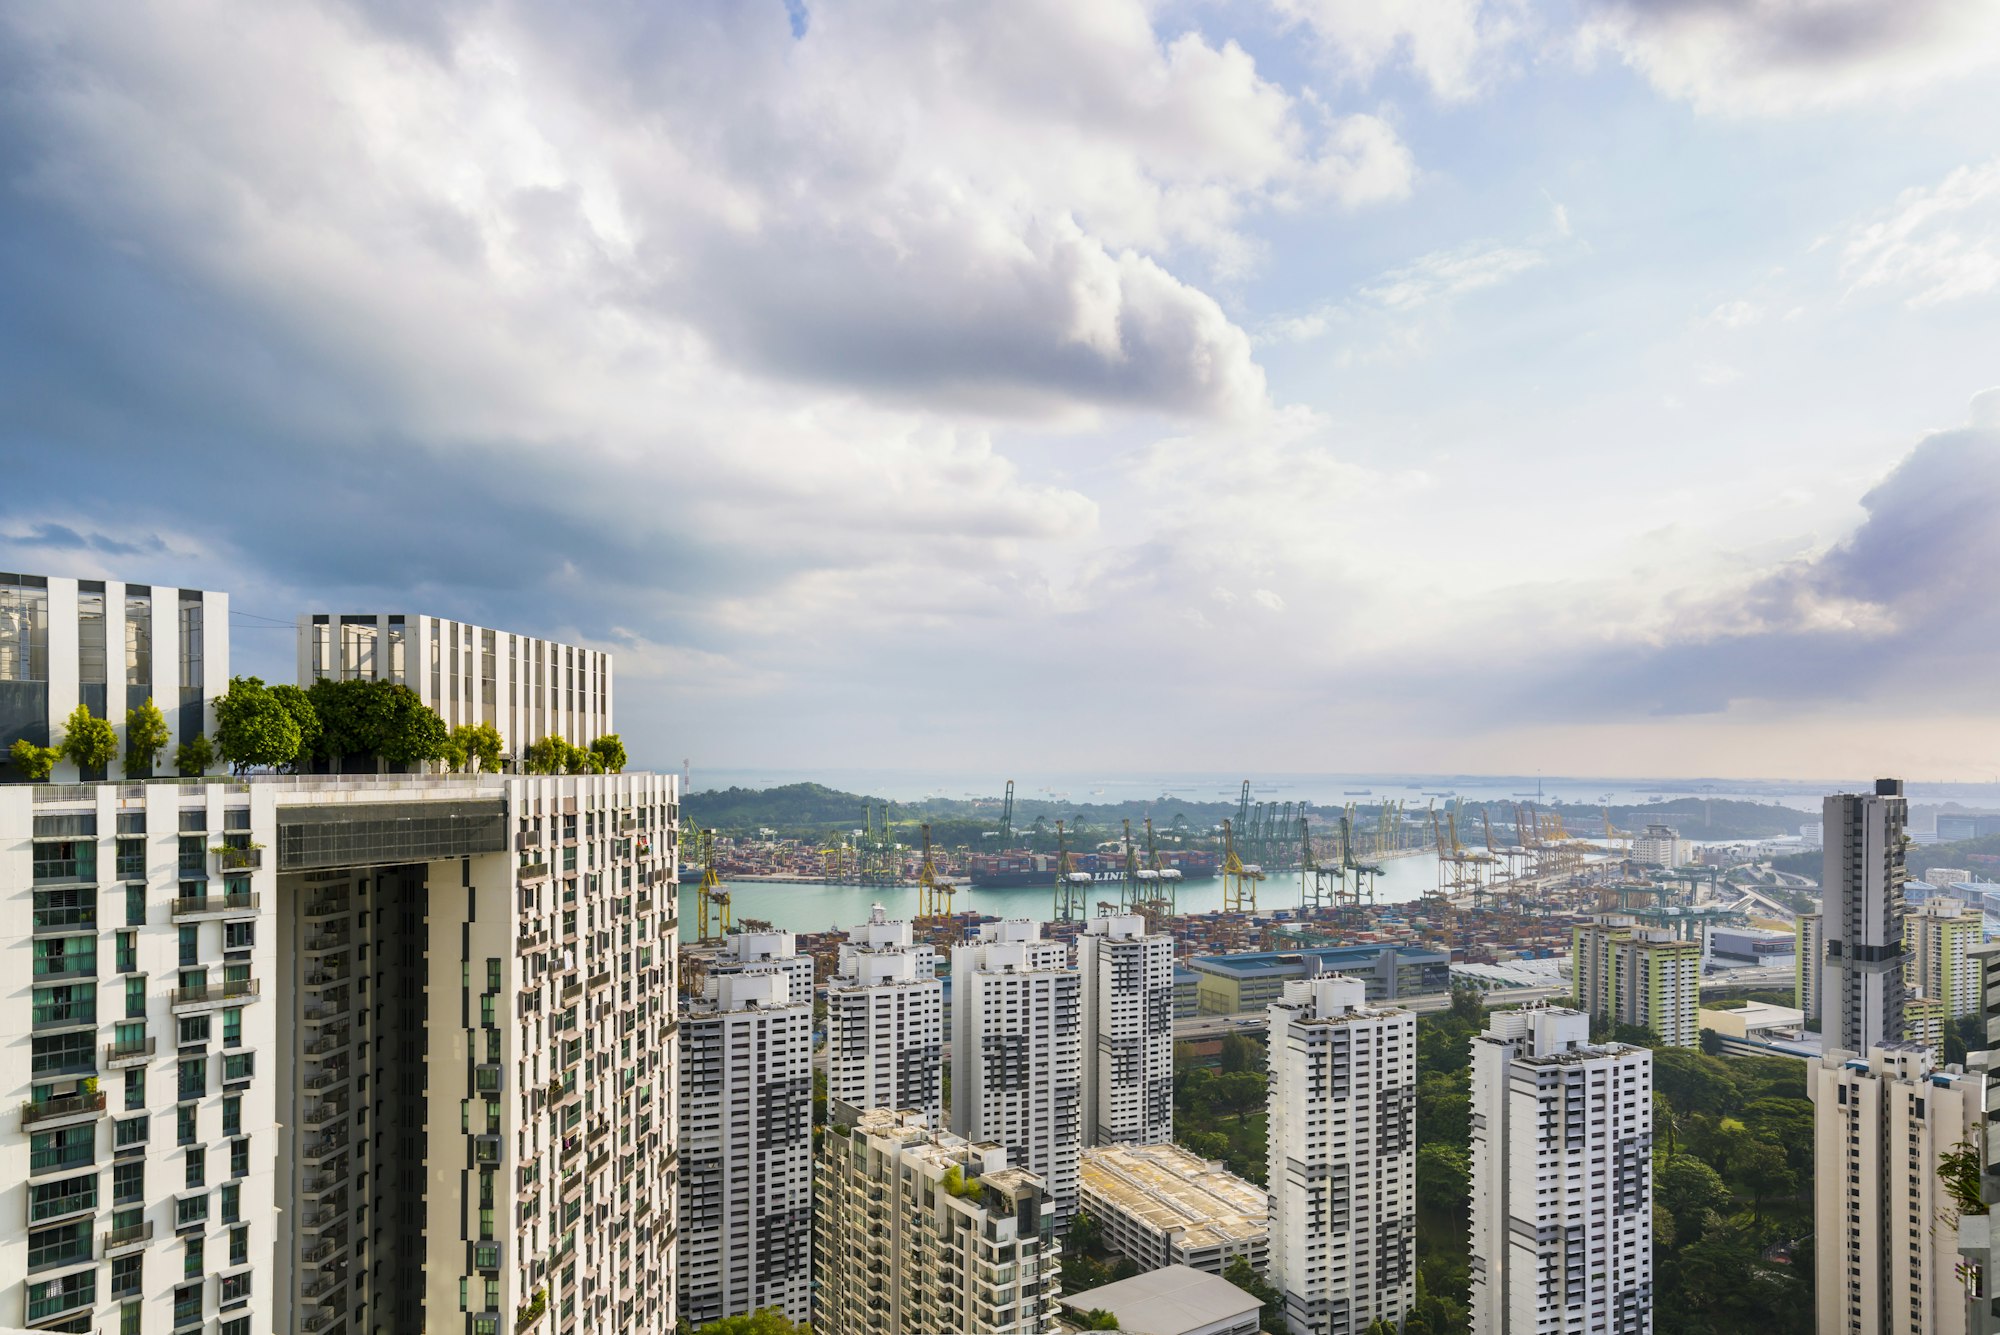 Elevated cityscape with apartment exteriors and coast, Singapore, South East Asia